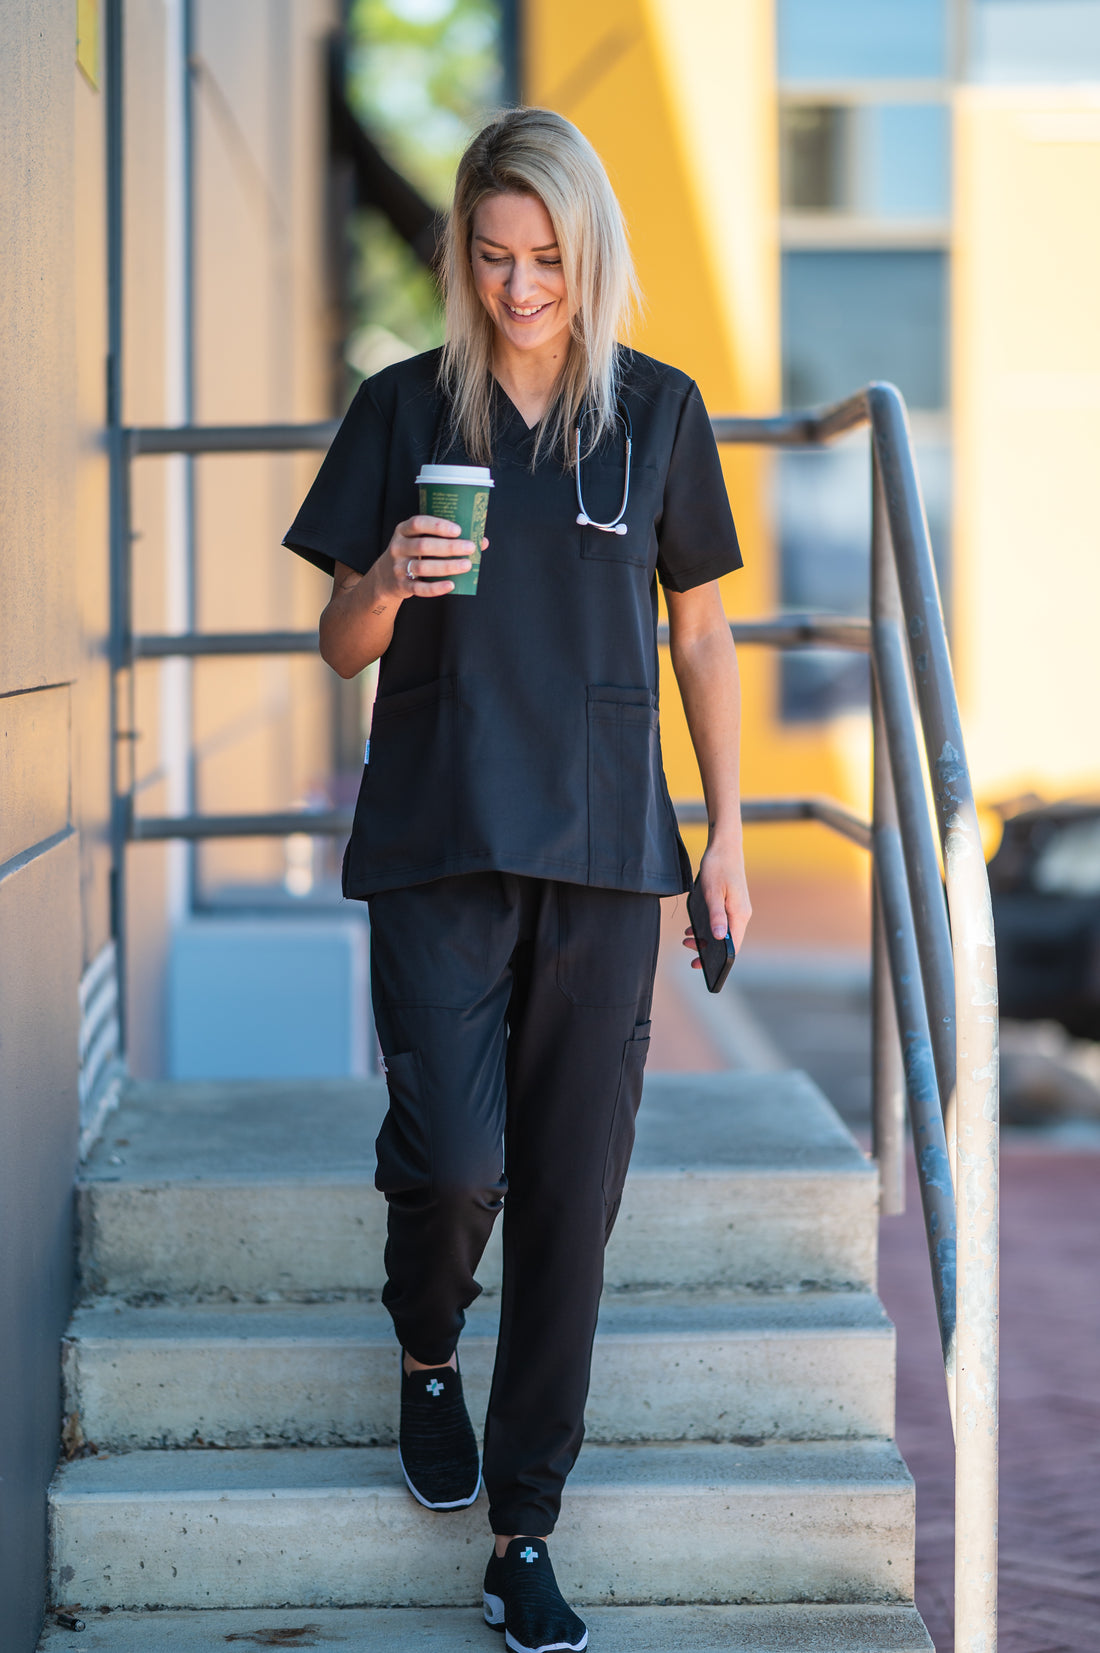 Why are Doctors in Australia Deciding to Wear Black Scrubs?